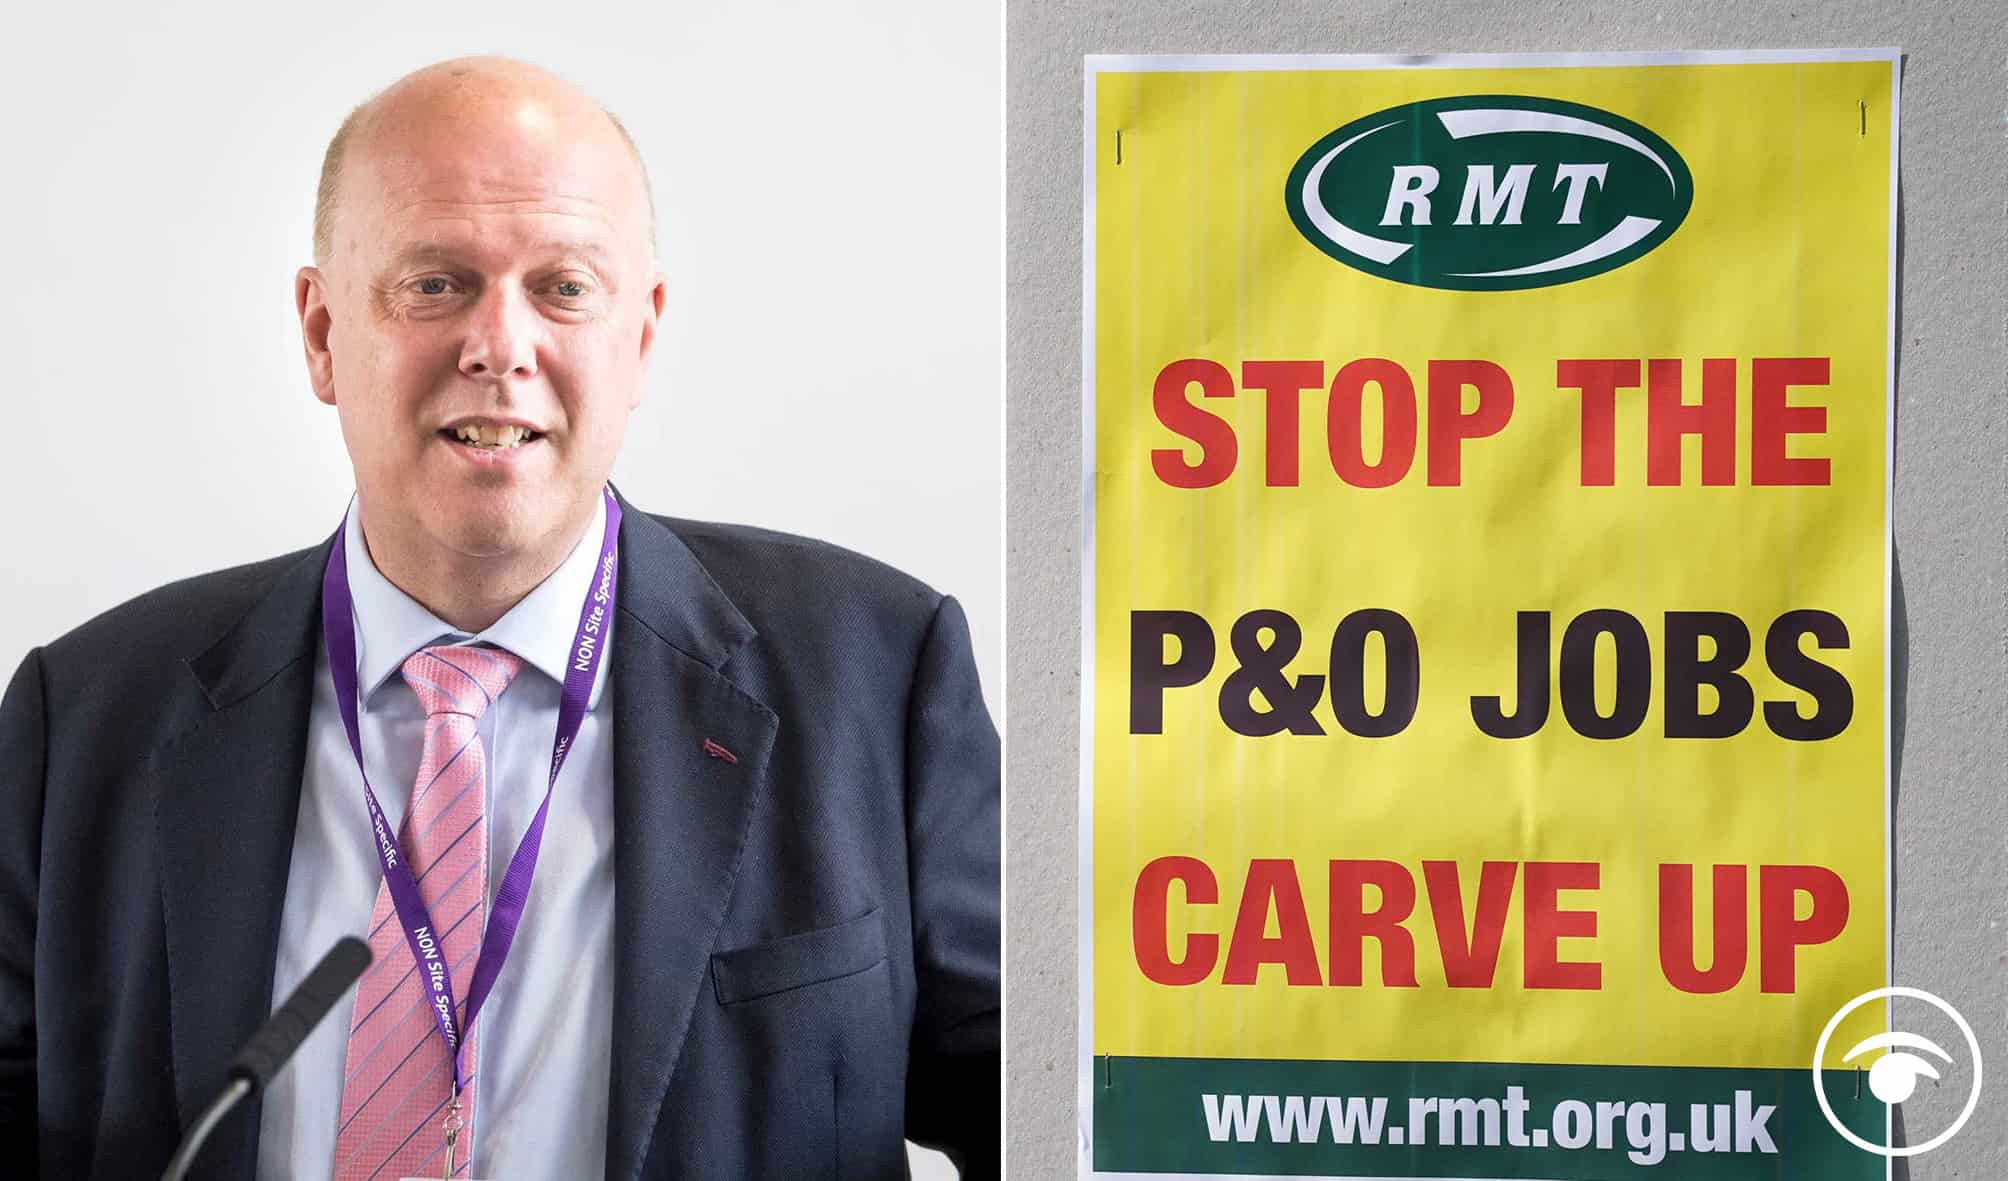 Failing again? Change in law signed off by Chris Grayling cleared way for P&O Ferries to legally sack 800 staff